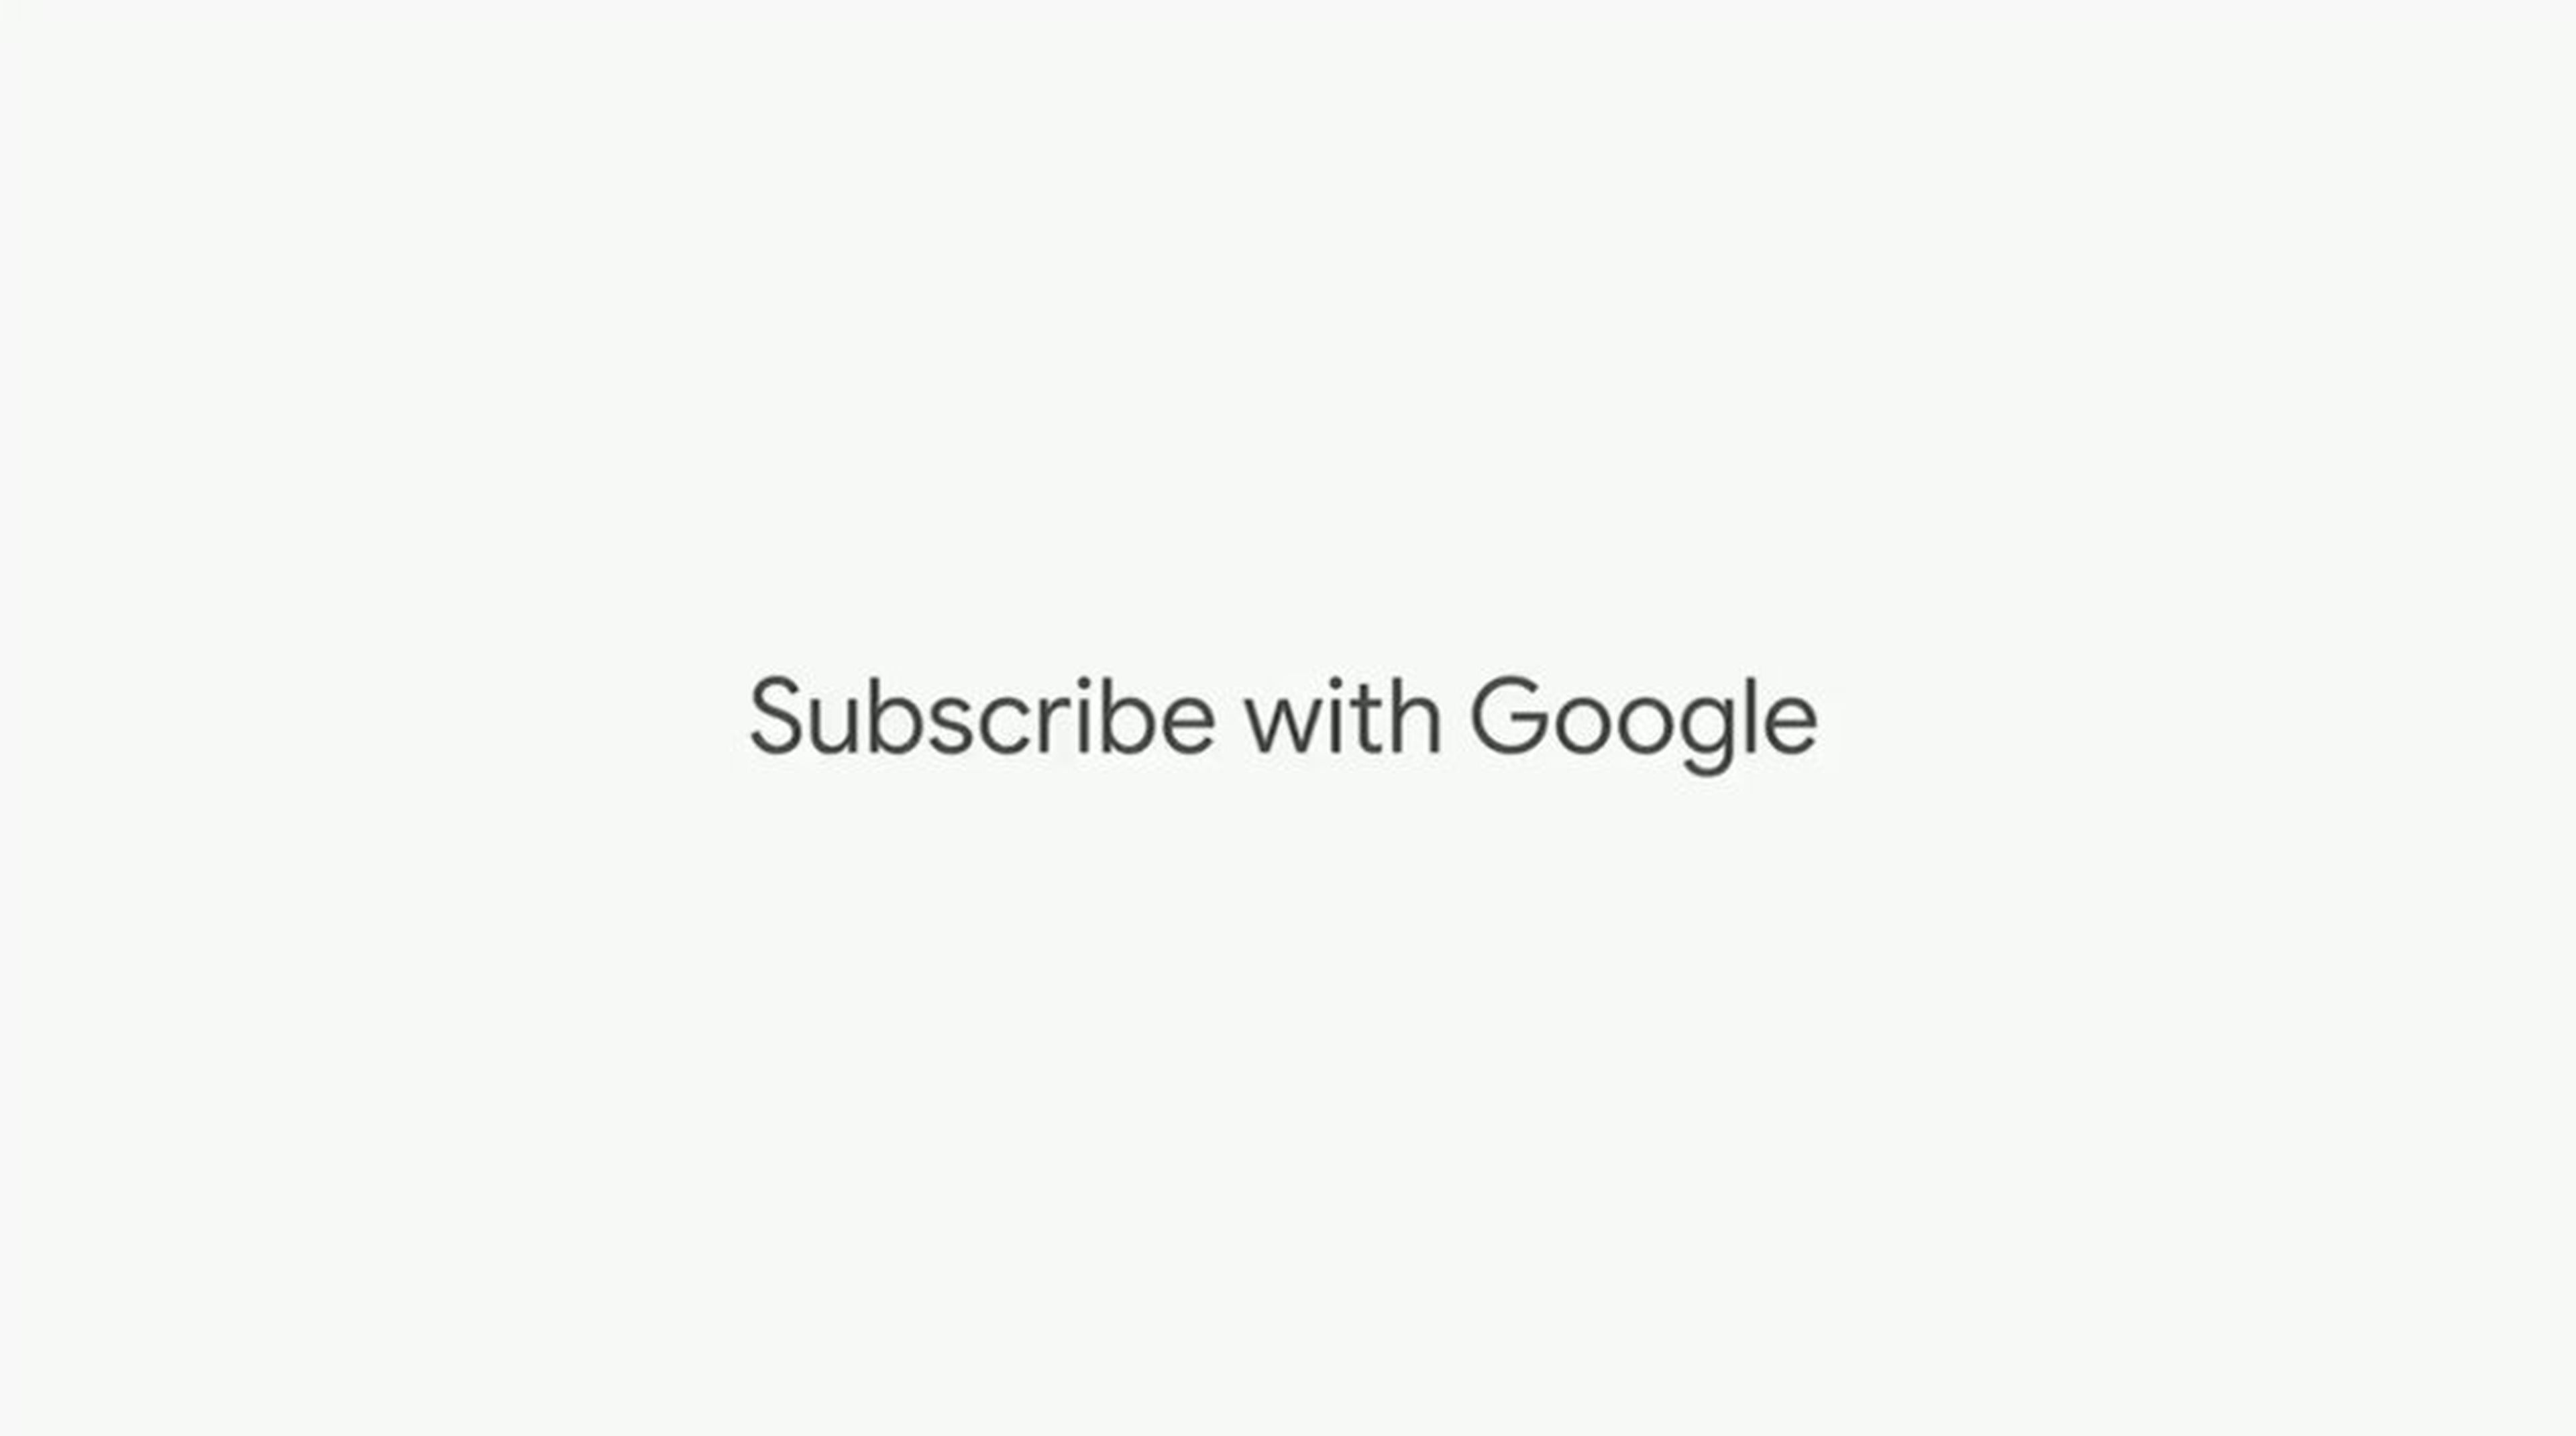 Suscribe with Google